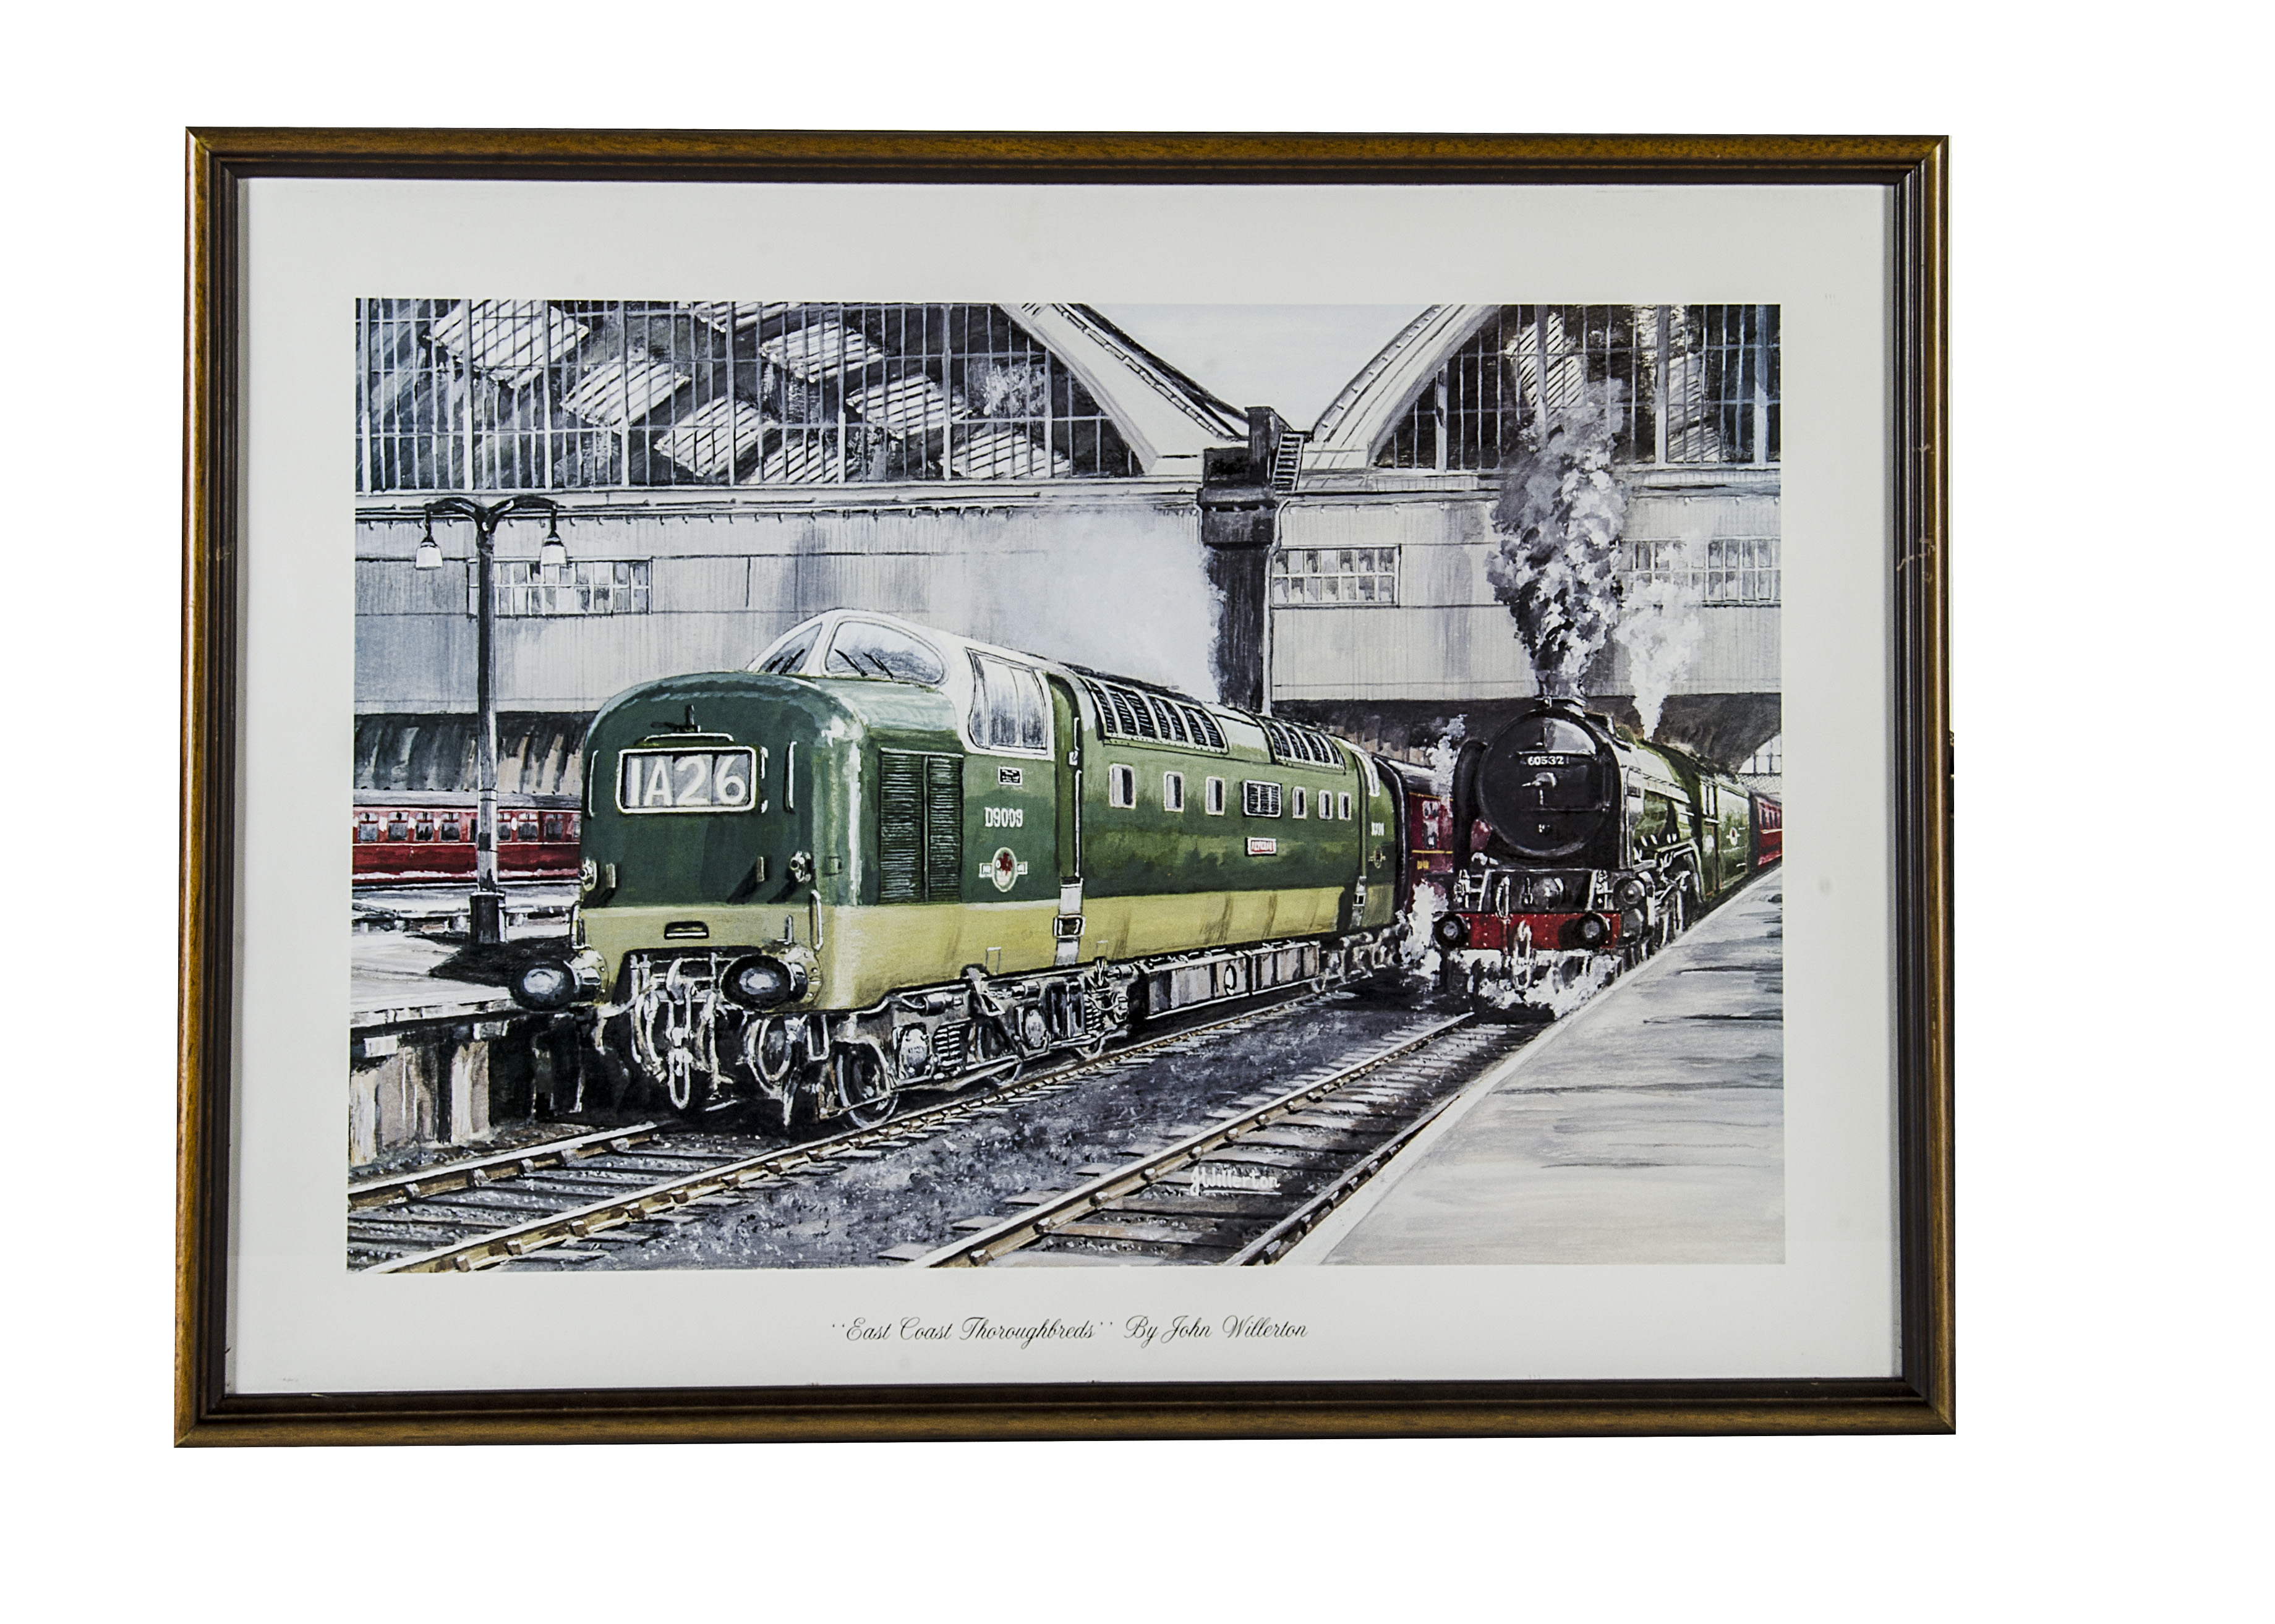 A Framed Print 'East Coast Thoroughbreds' by John Willerton, depicting 'Deltic' D9009 and A2 class